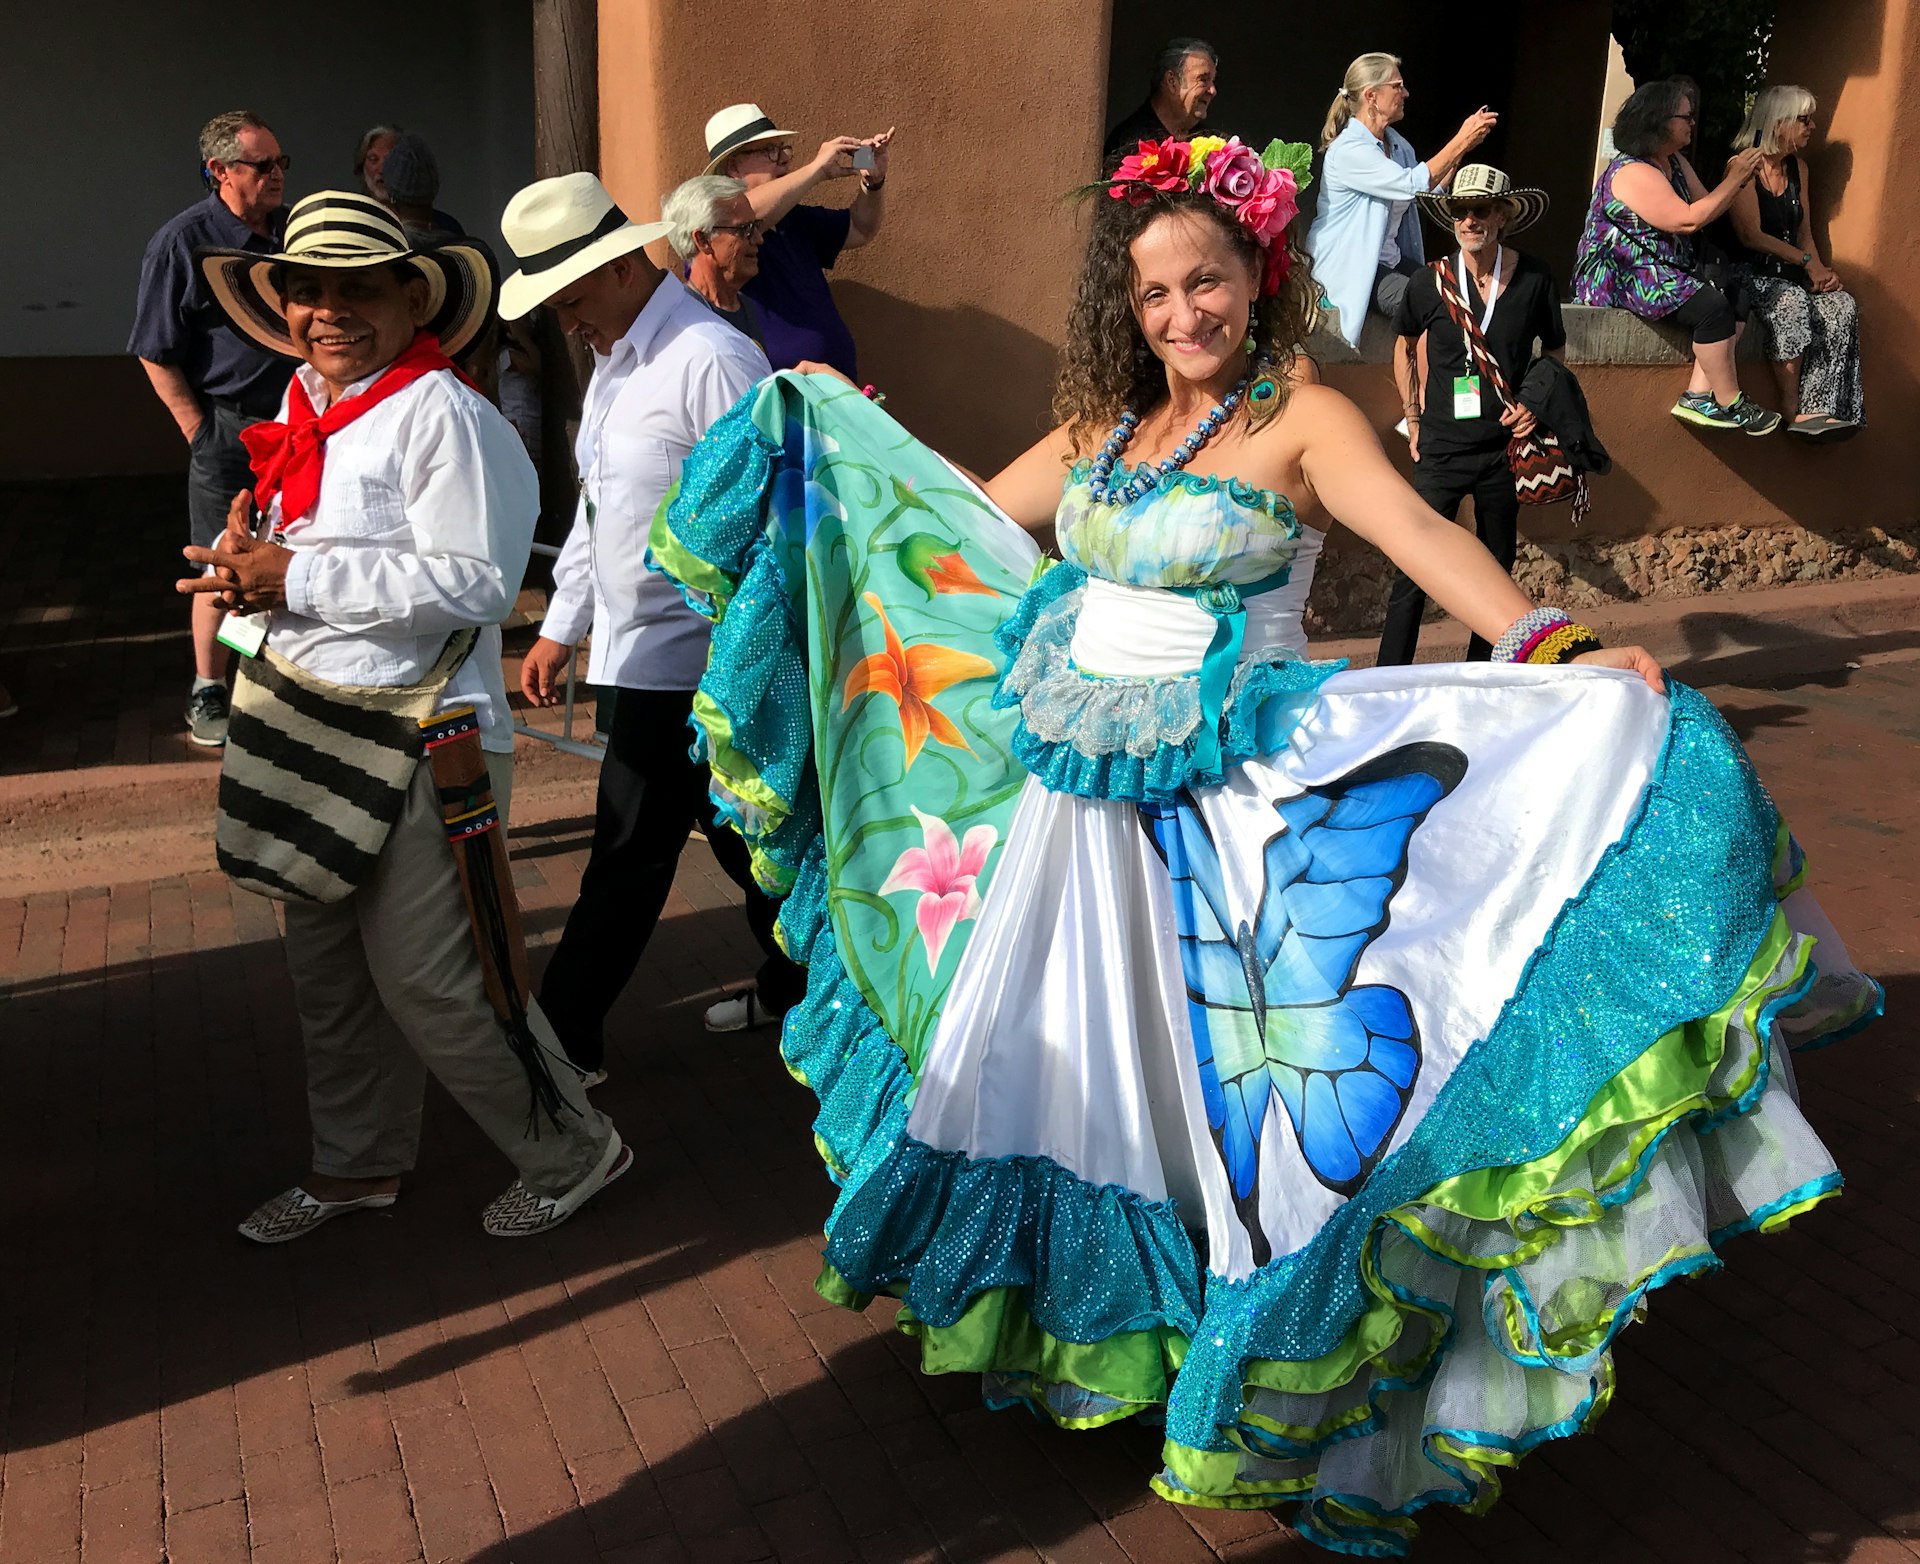 A woman smiles at the camera as she parades down a street. She's wearing a beautiful dress with intricate designs, which she proudly shows to the camera